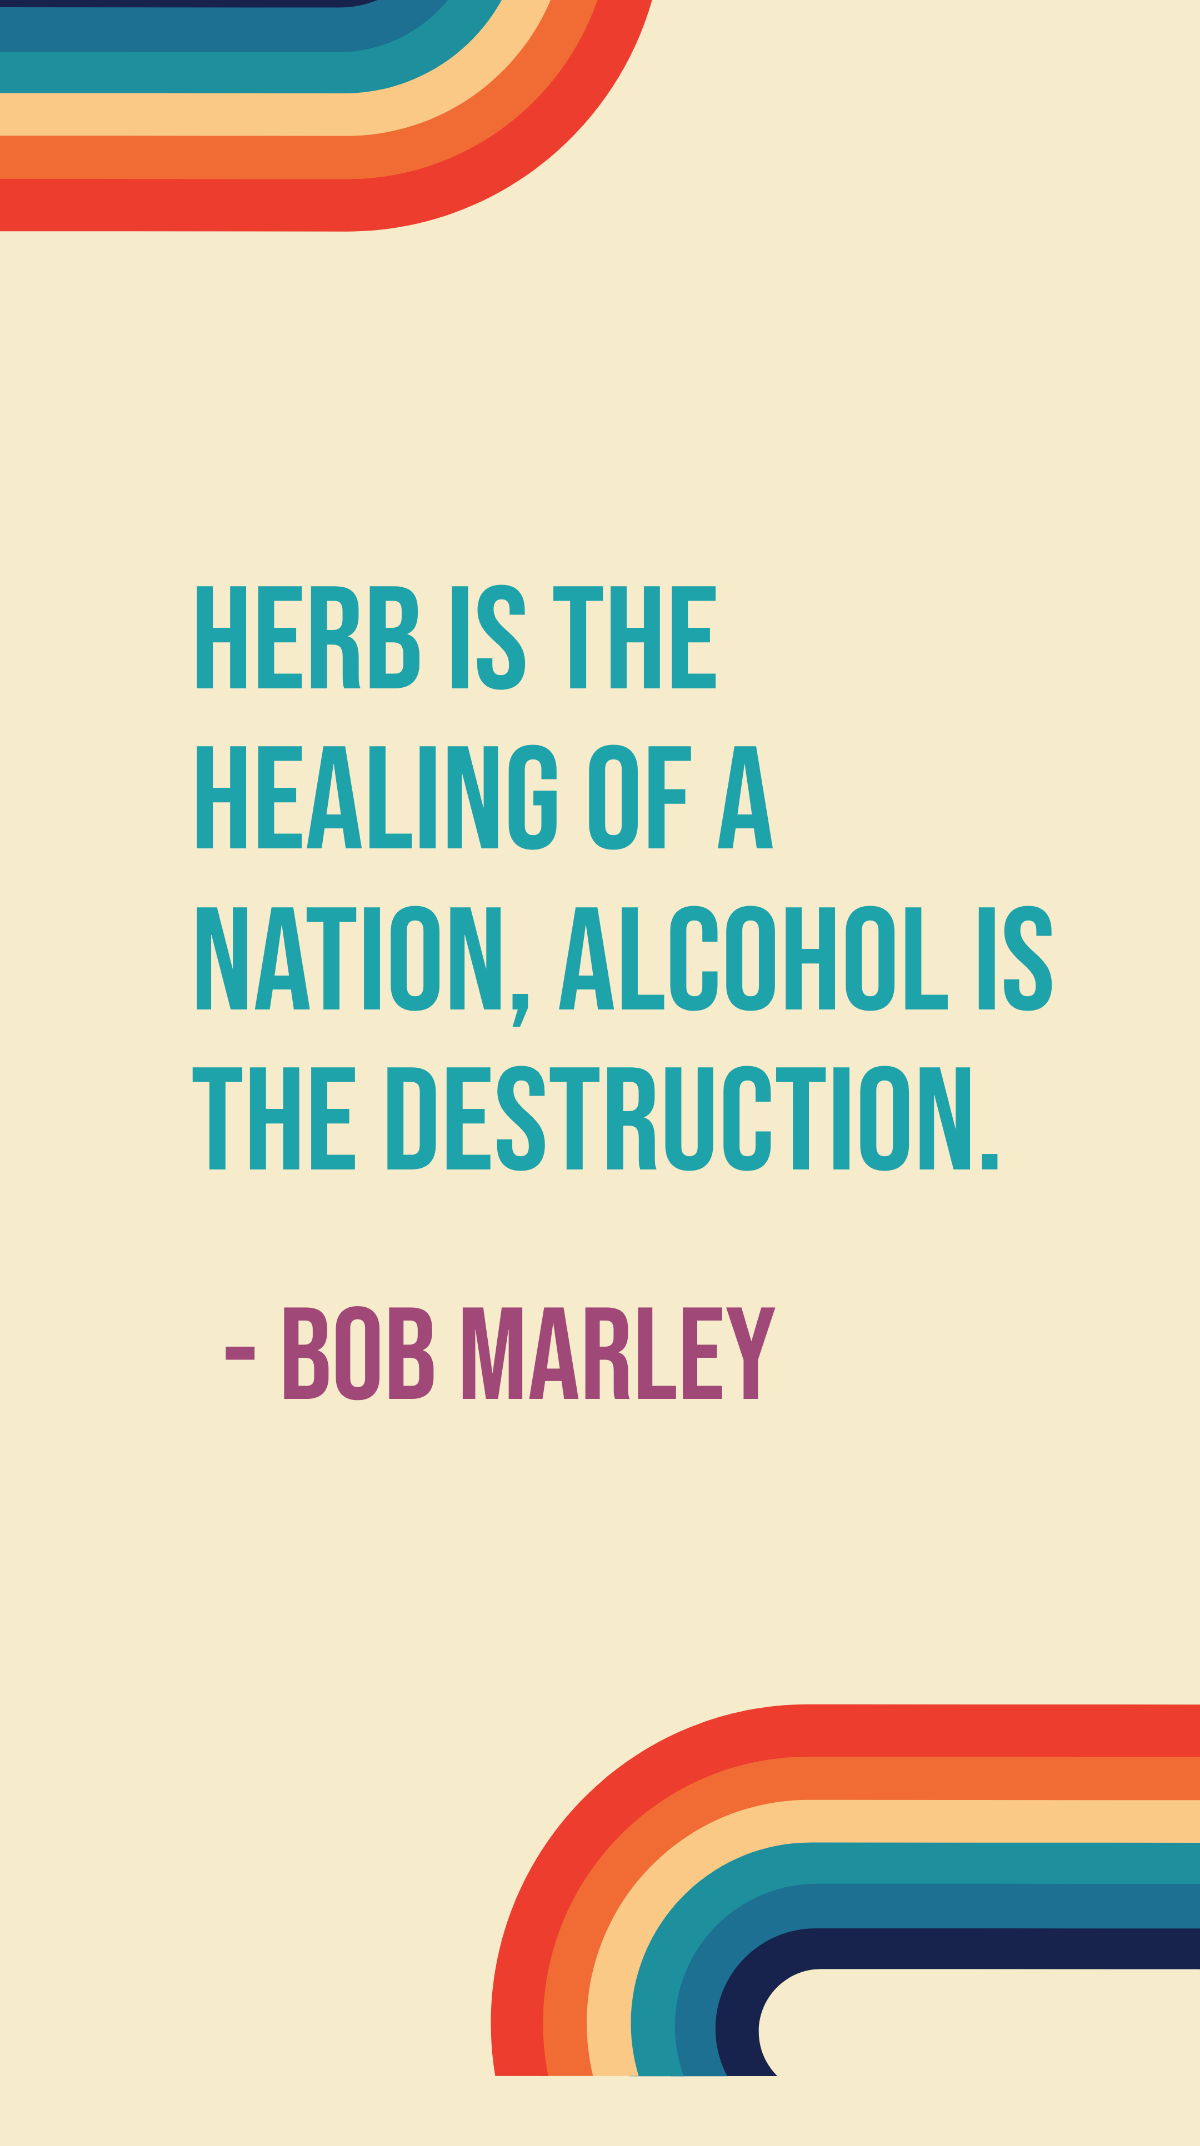 Bob Marley - Herb is the healing of a nation, alcohol is the destruction.